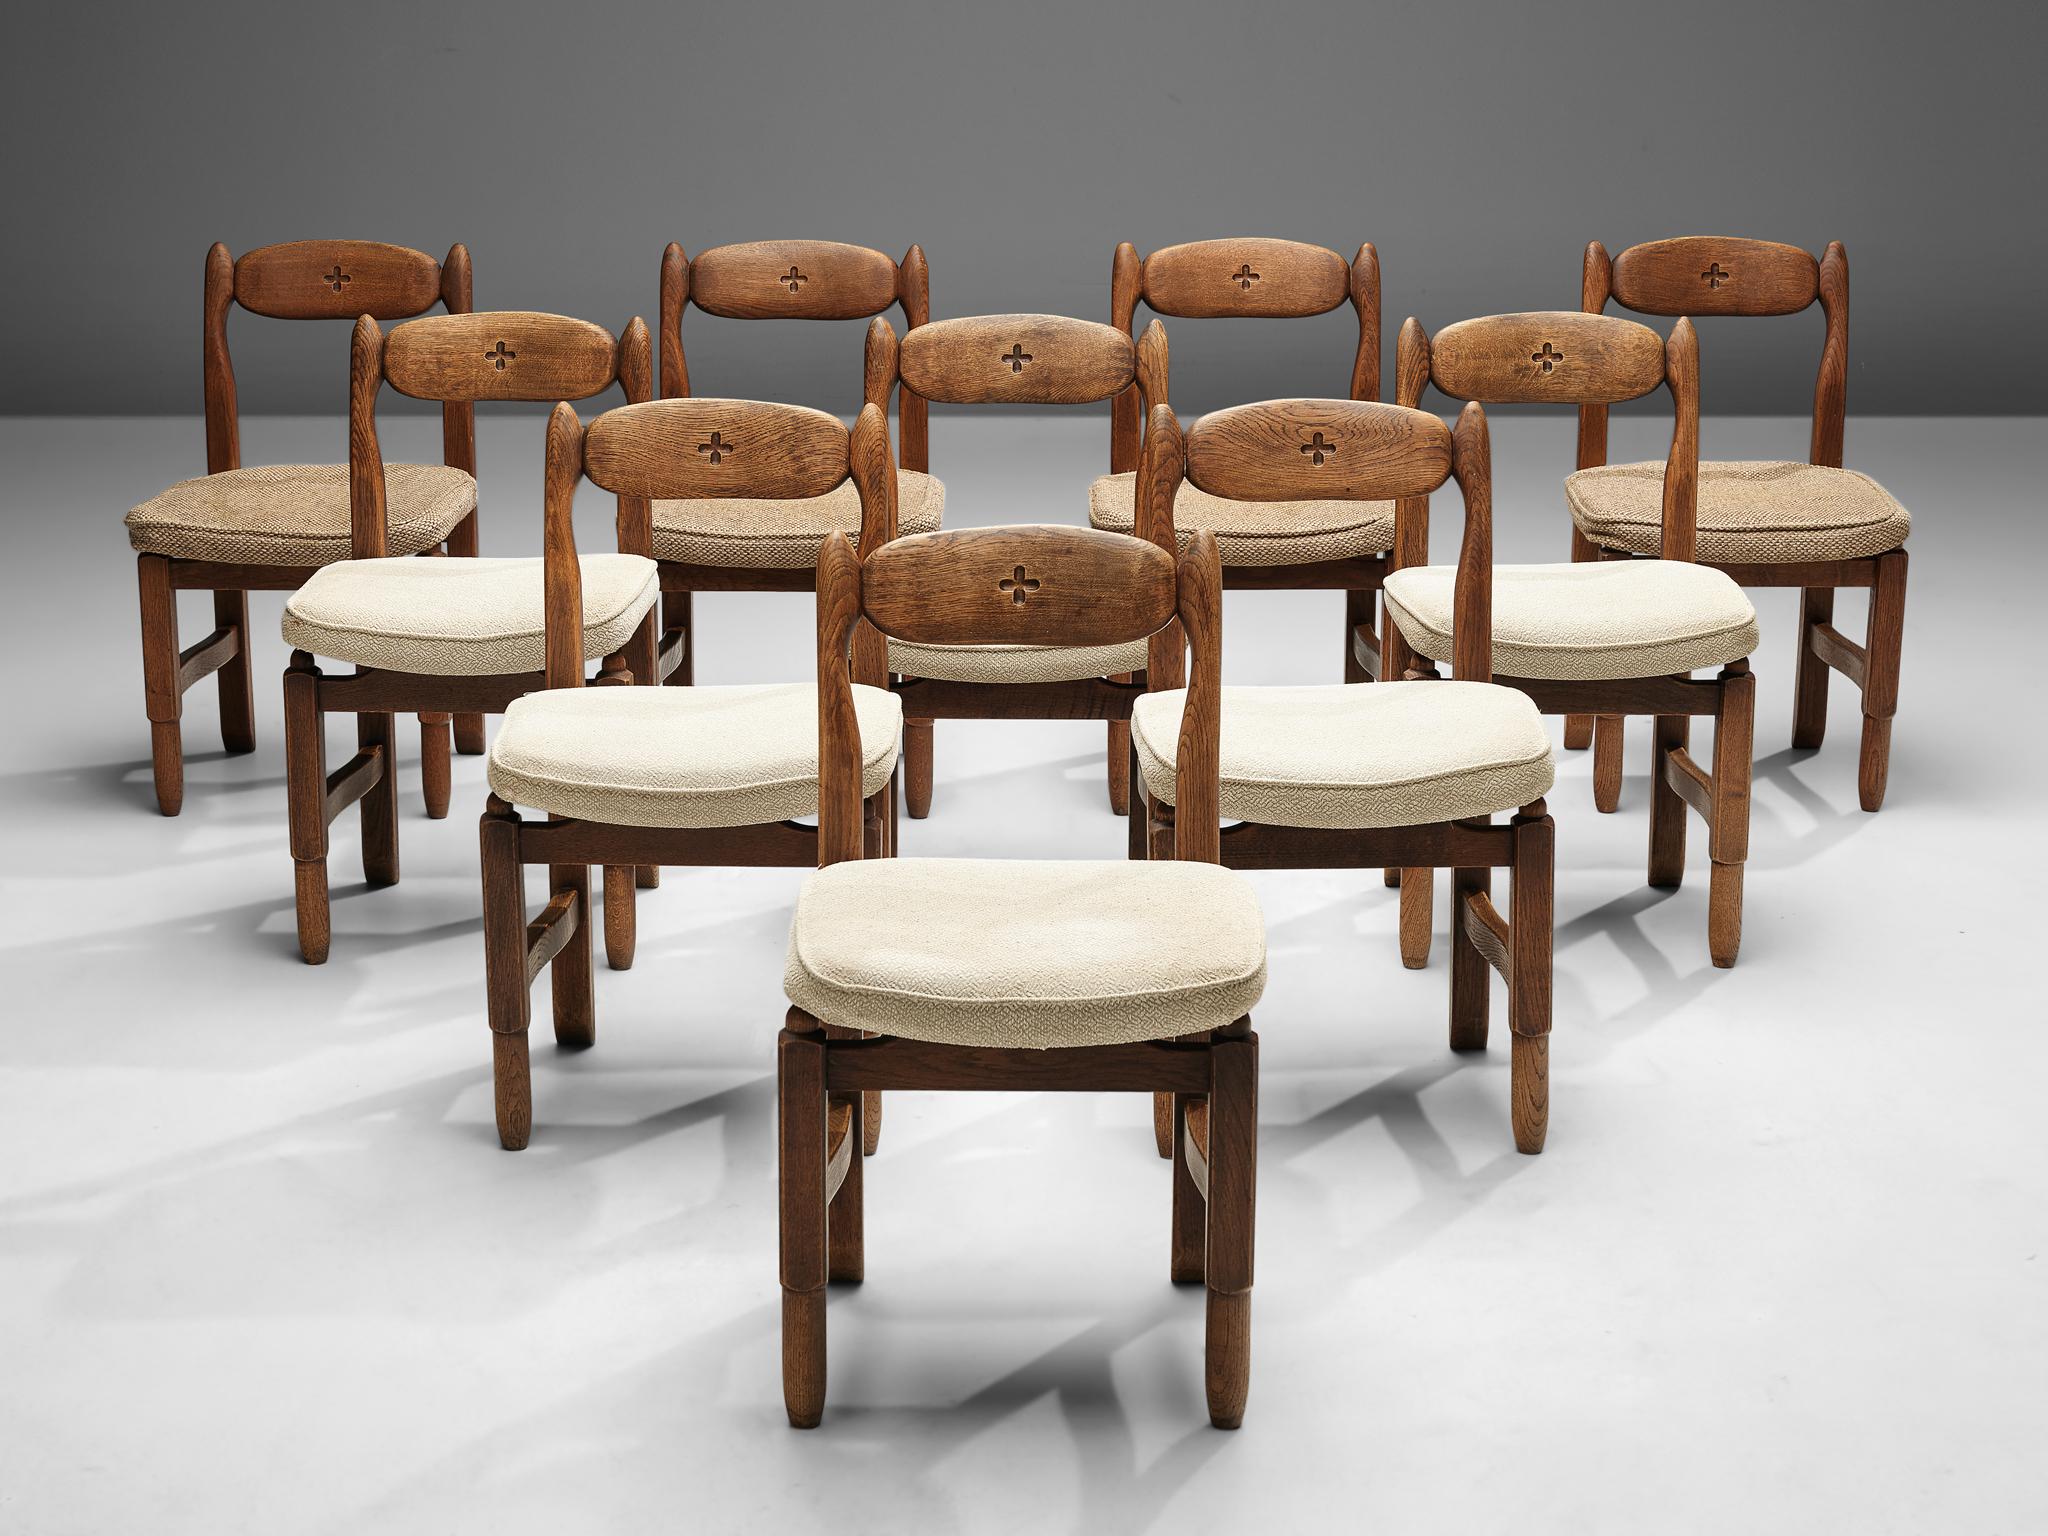 Guillerme et Chambron, set of ten ‘Lorraine’ dining chairs, oak, fabric upholstery, France, 1960s.
 
This set of ‘Lorraine’ dining chairs by French designer duo Guillerme et Chambron shows a decorative motif in the backrest. Here a cross with four